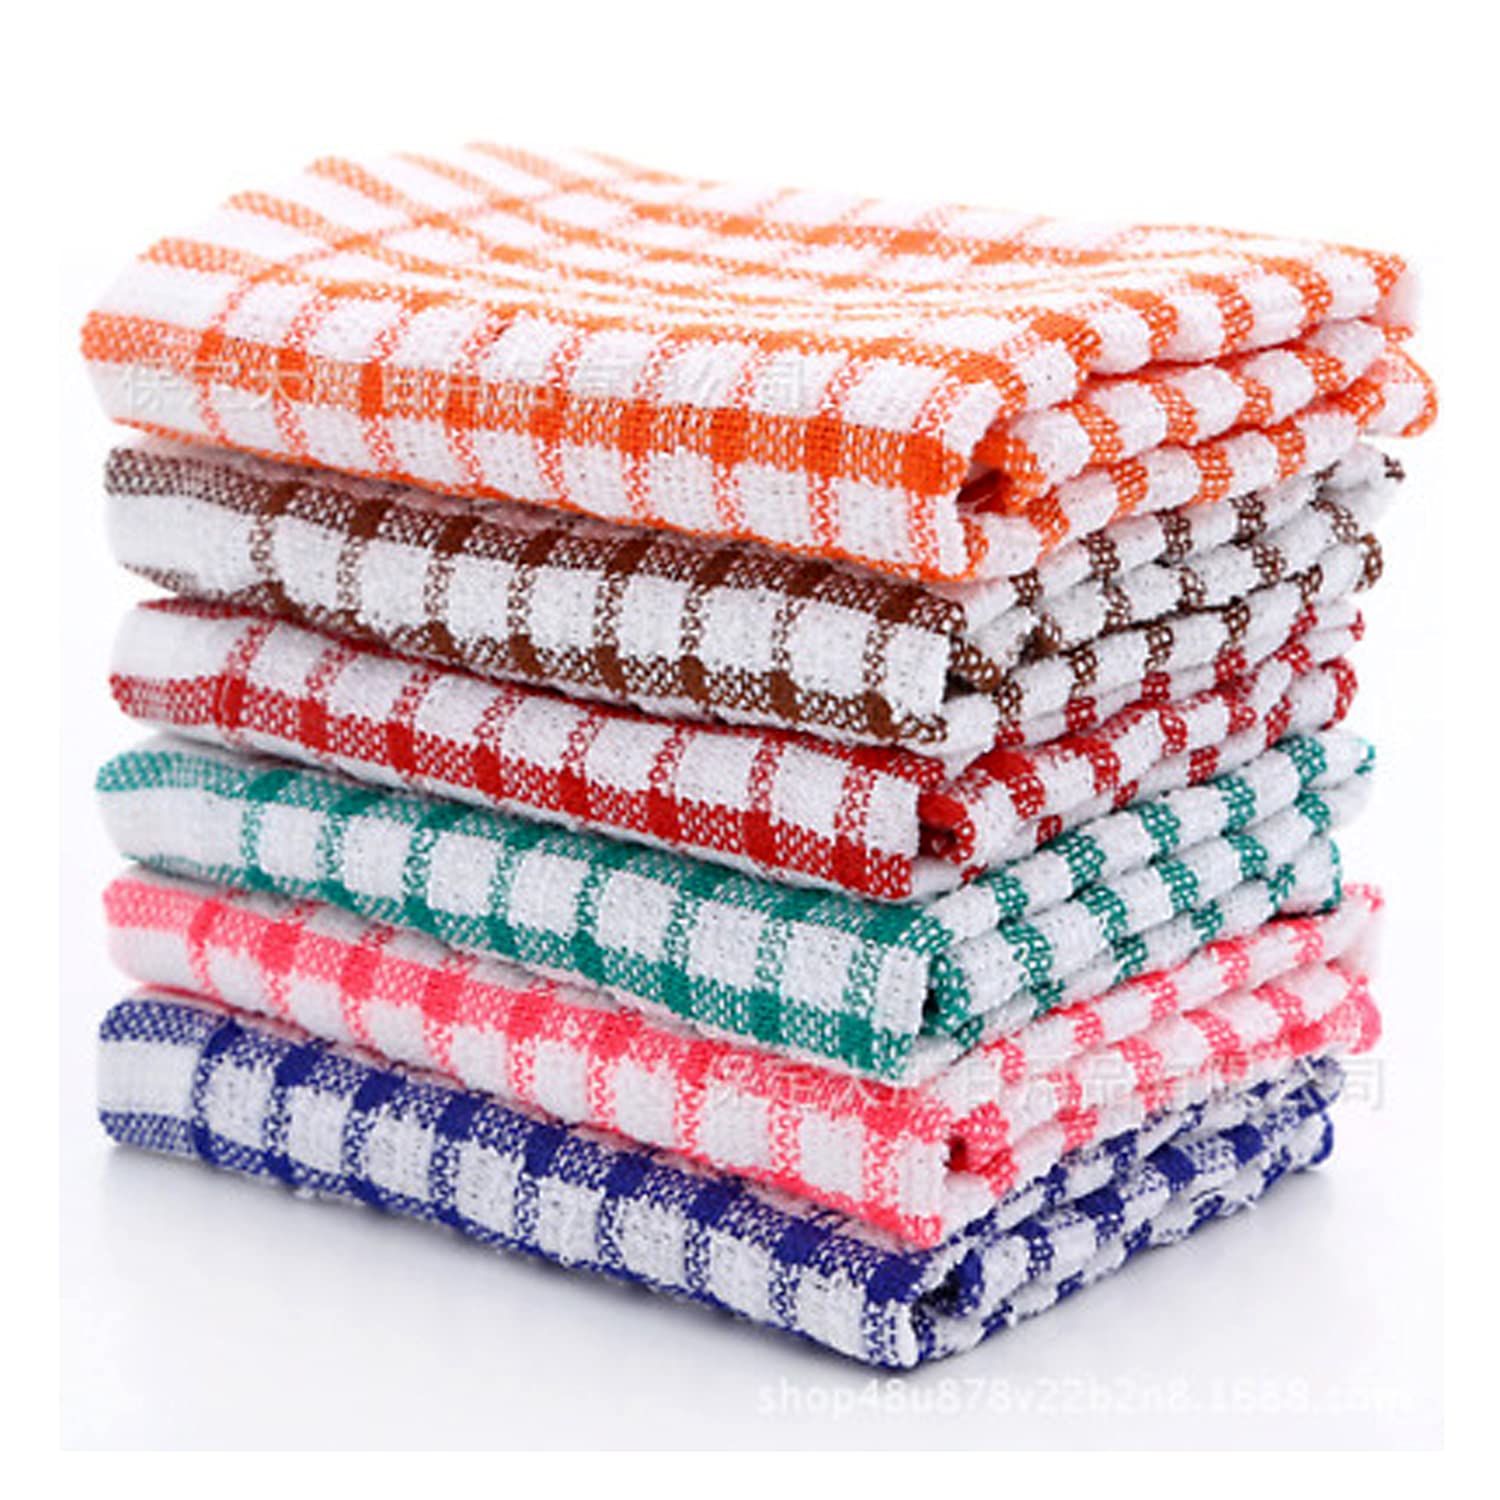 MAS International Ltd TERRY TEA TOWEL 100% COTTON SOFT TOUCH in Pack of 2, 4, 6, 8, 10 & 12 (Pack of 4)